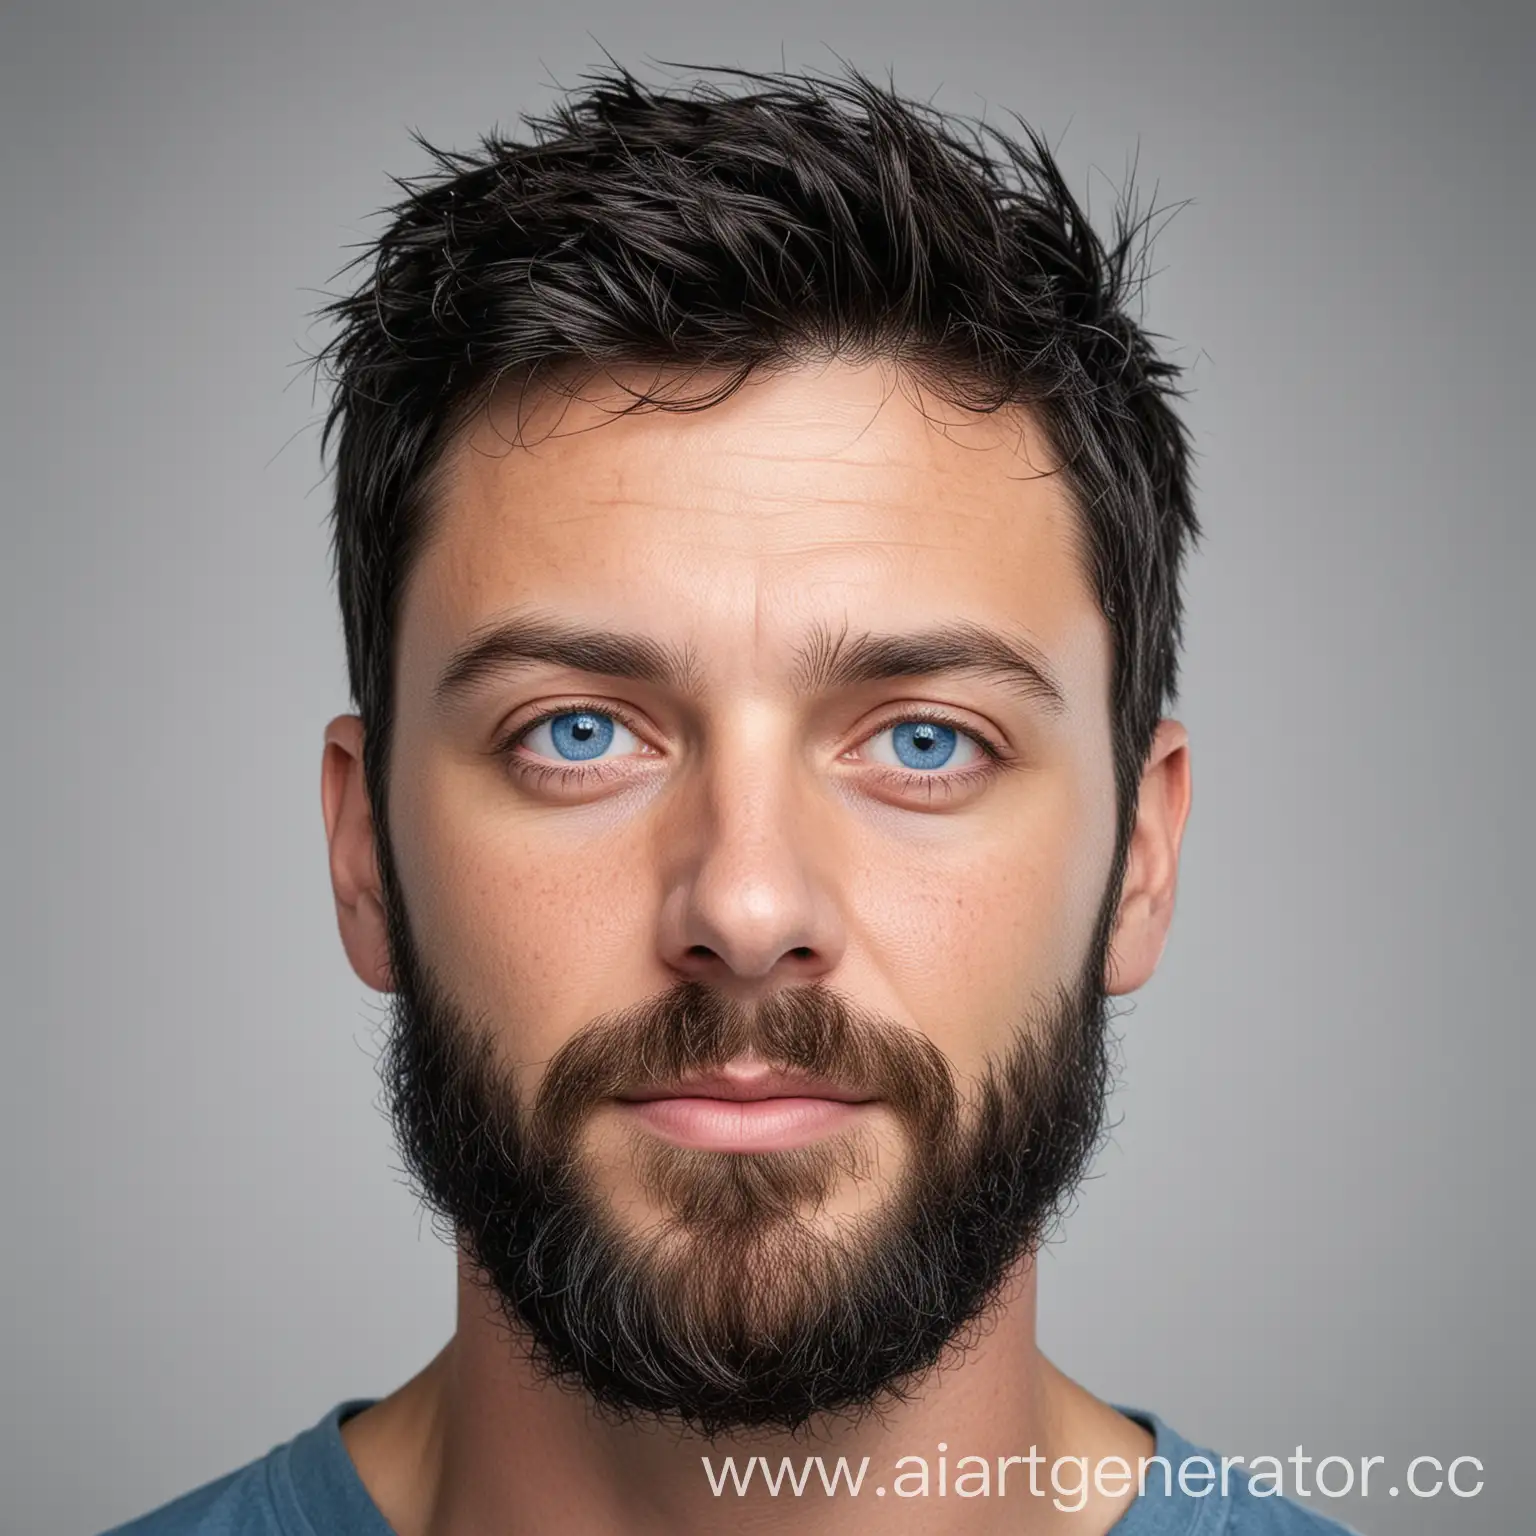 Middleaged-European-Man-with-Beard-and-Blue-Eyes-on-White-Background